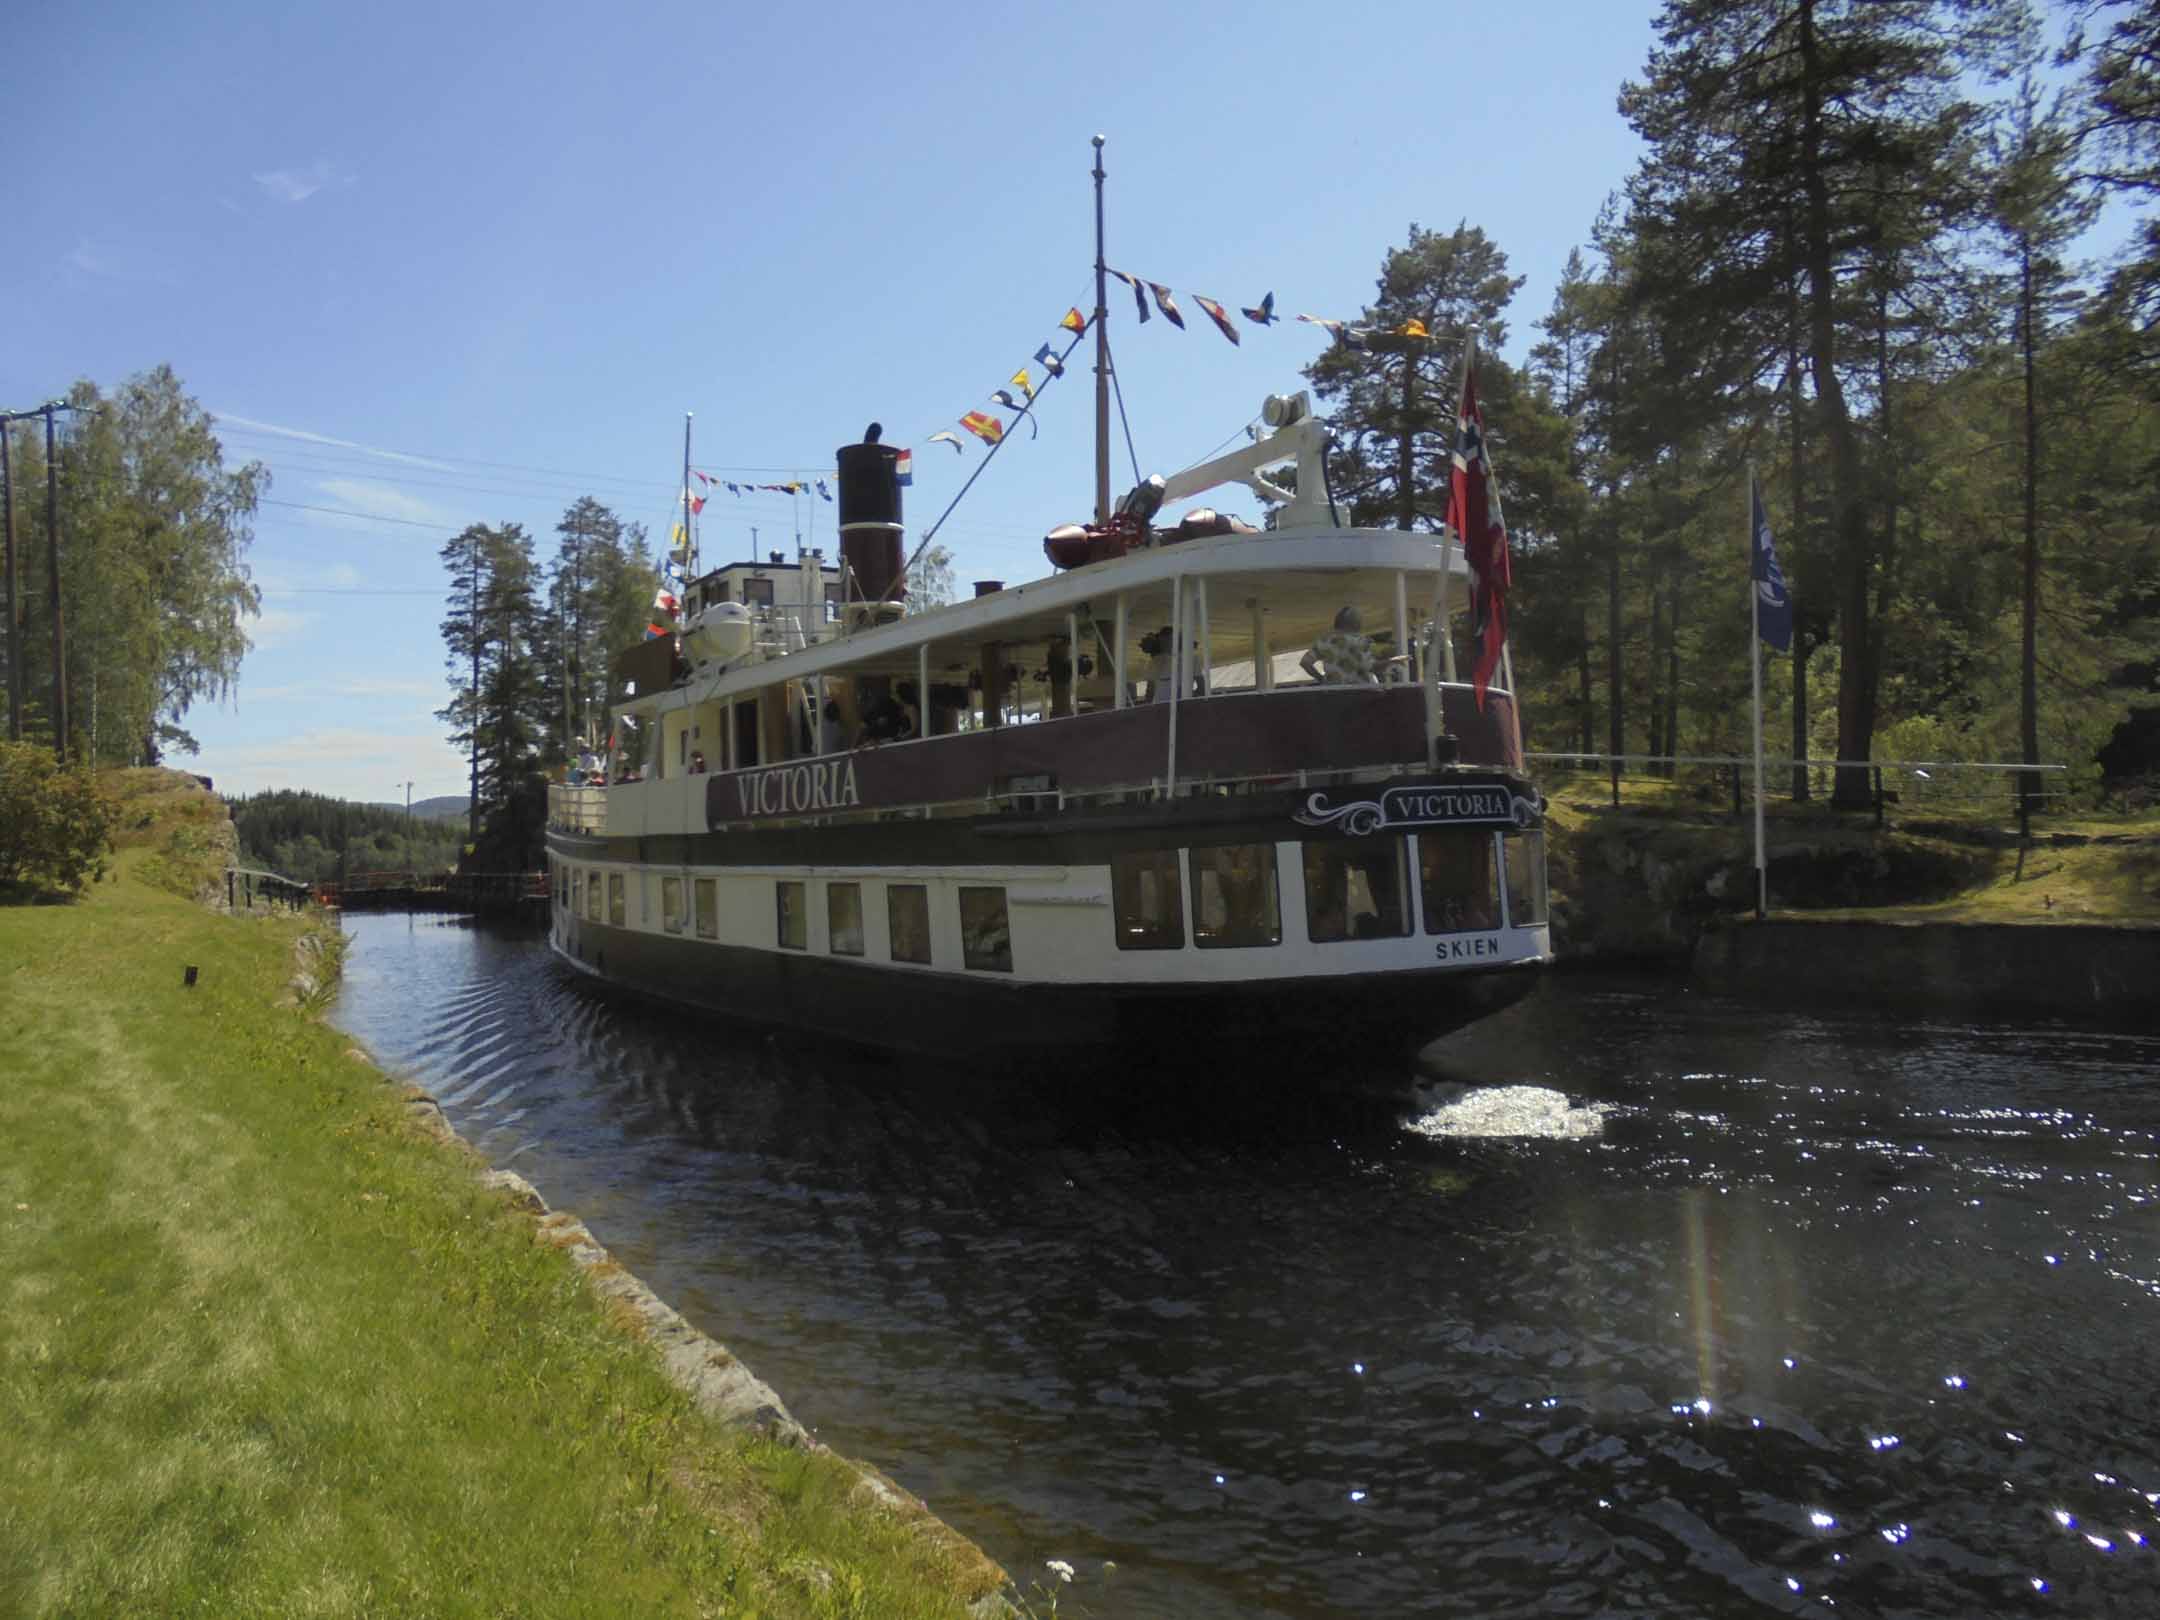 Steamer Victoria on the Telemarc Canal